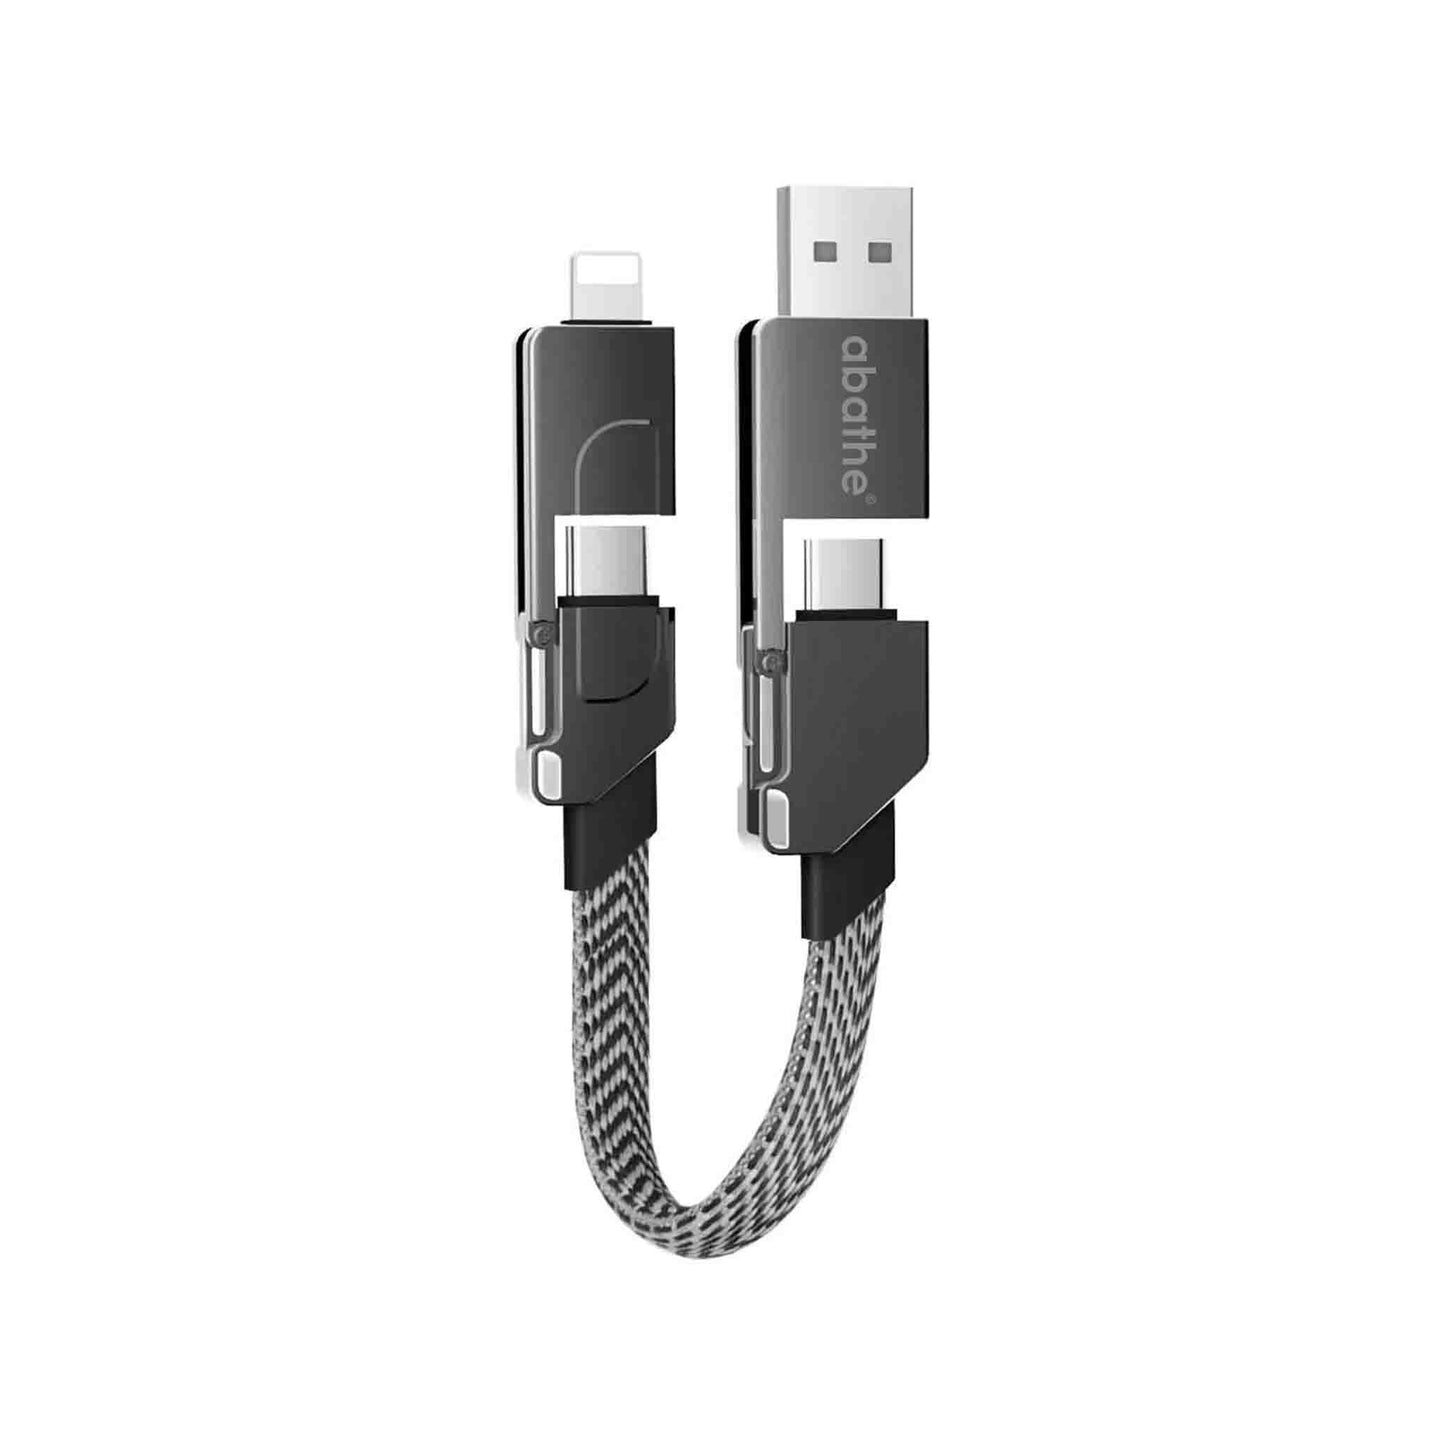 MagCable 5in1 short "metal" fast charging and data transfer cable